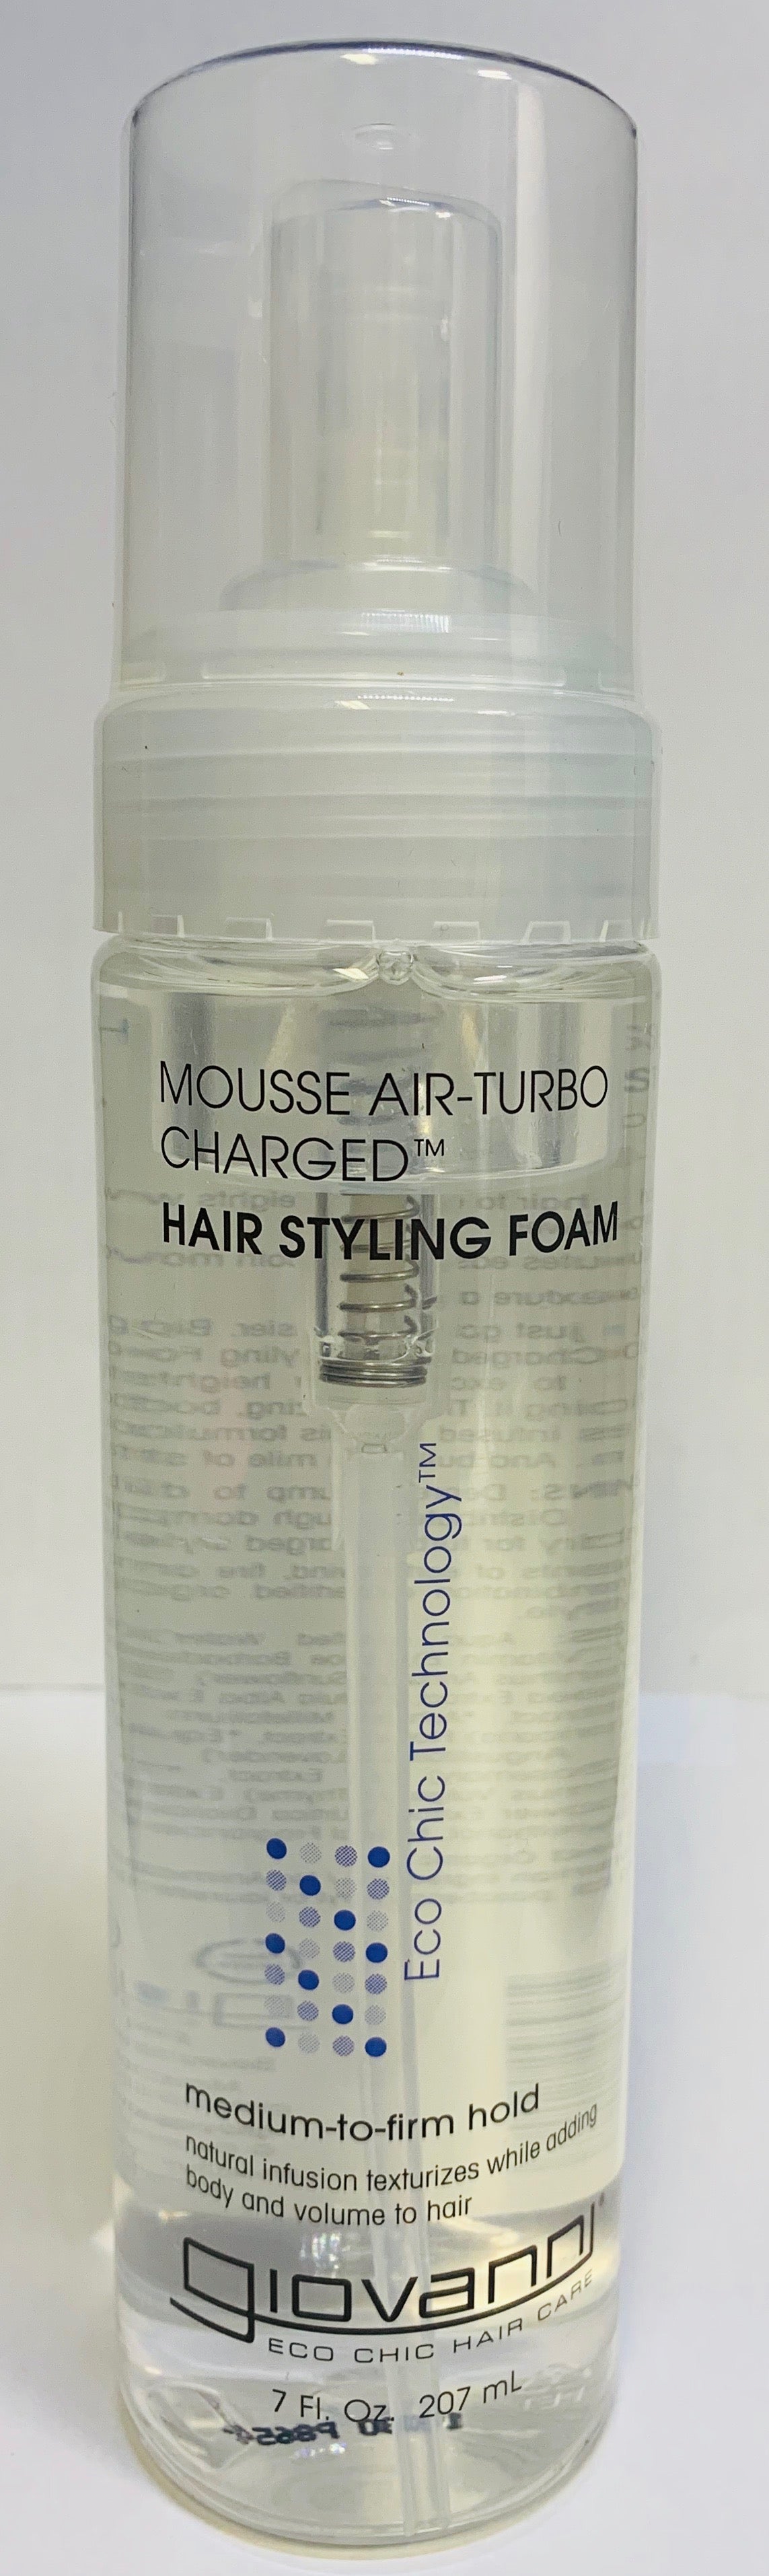 Giovanni Natural Mousse Hair Styling Foam (207ml) - Lifestyle Markets